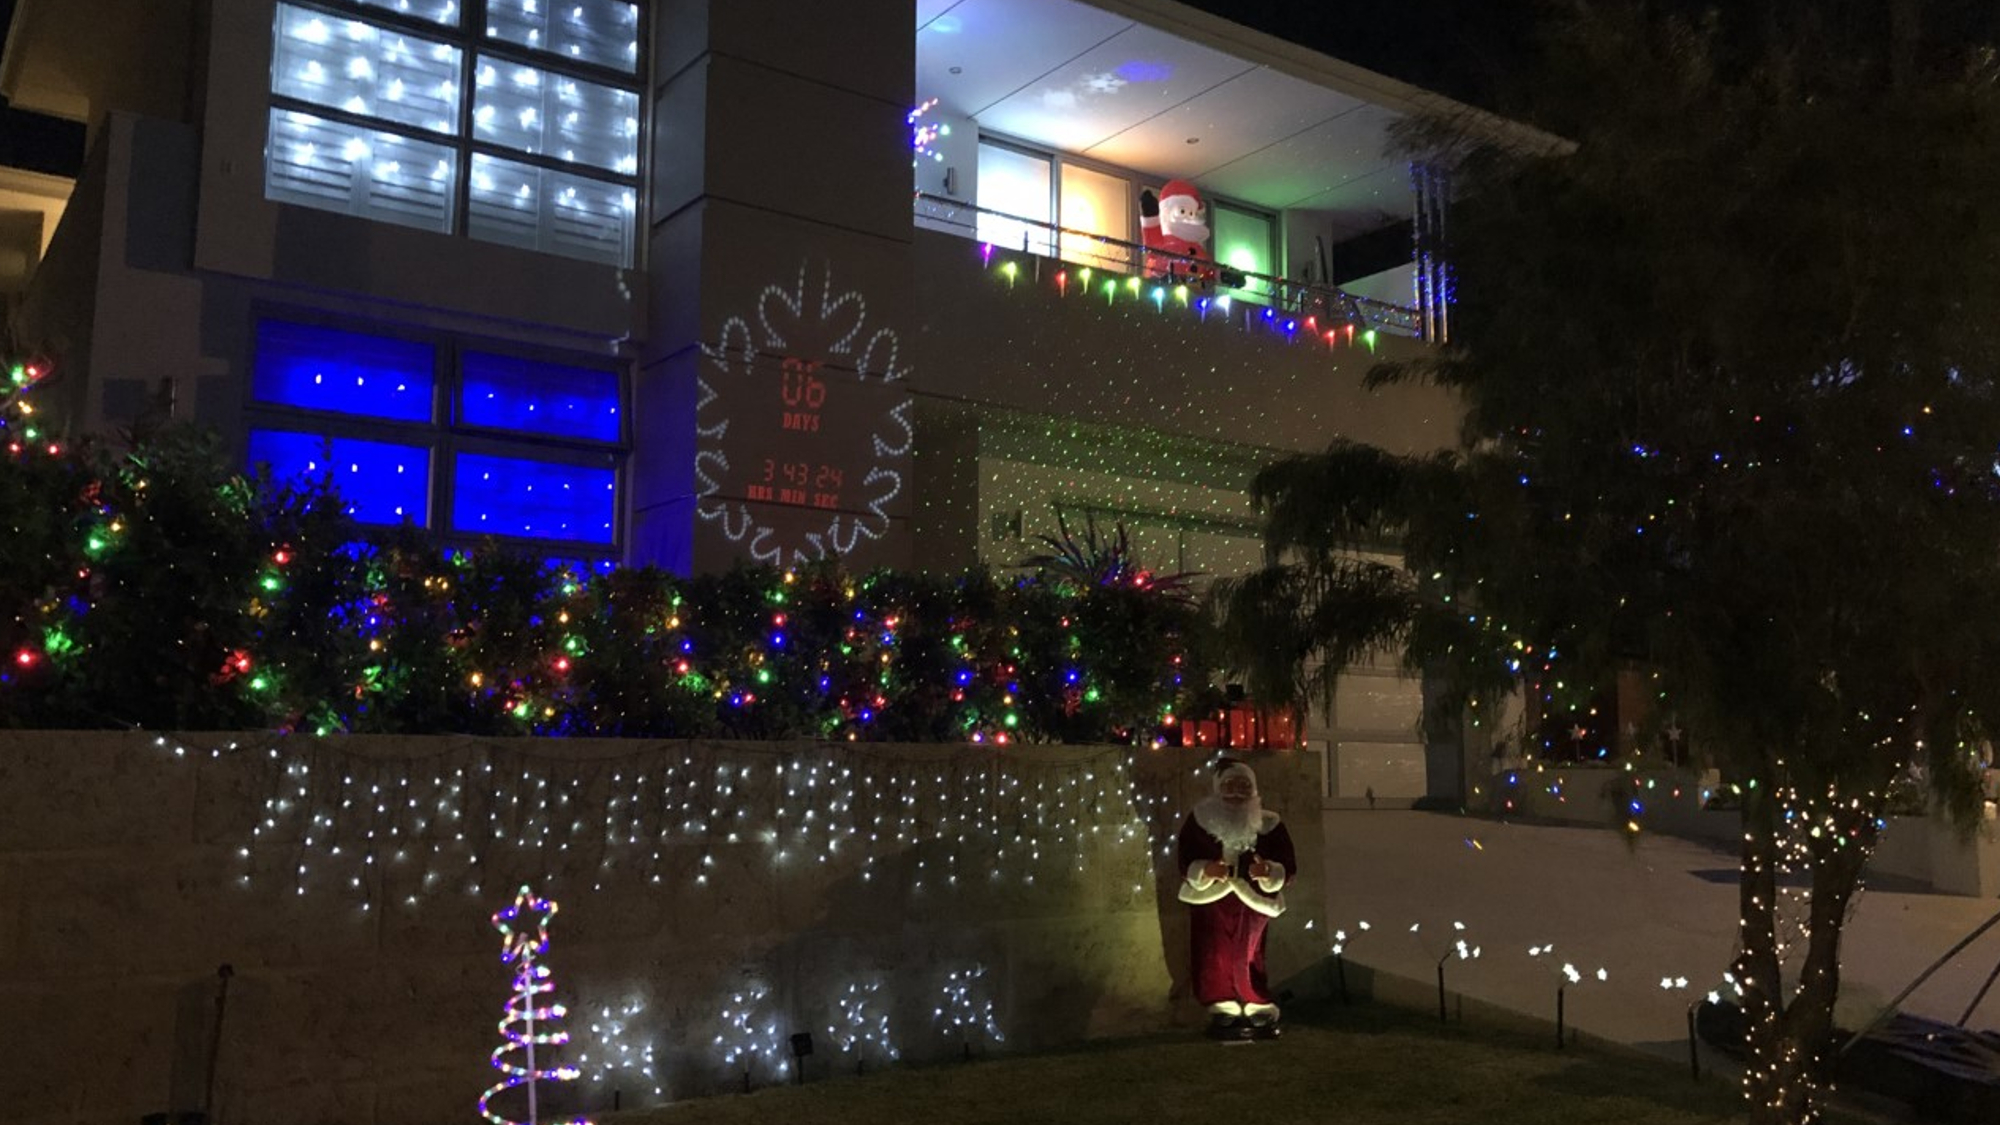 Competition - Festival of Lights finalist